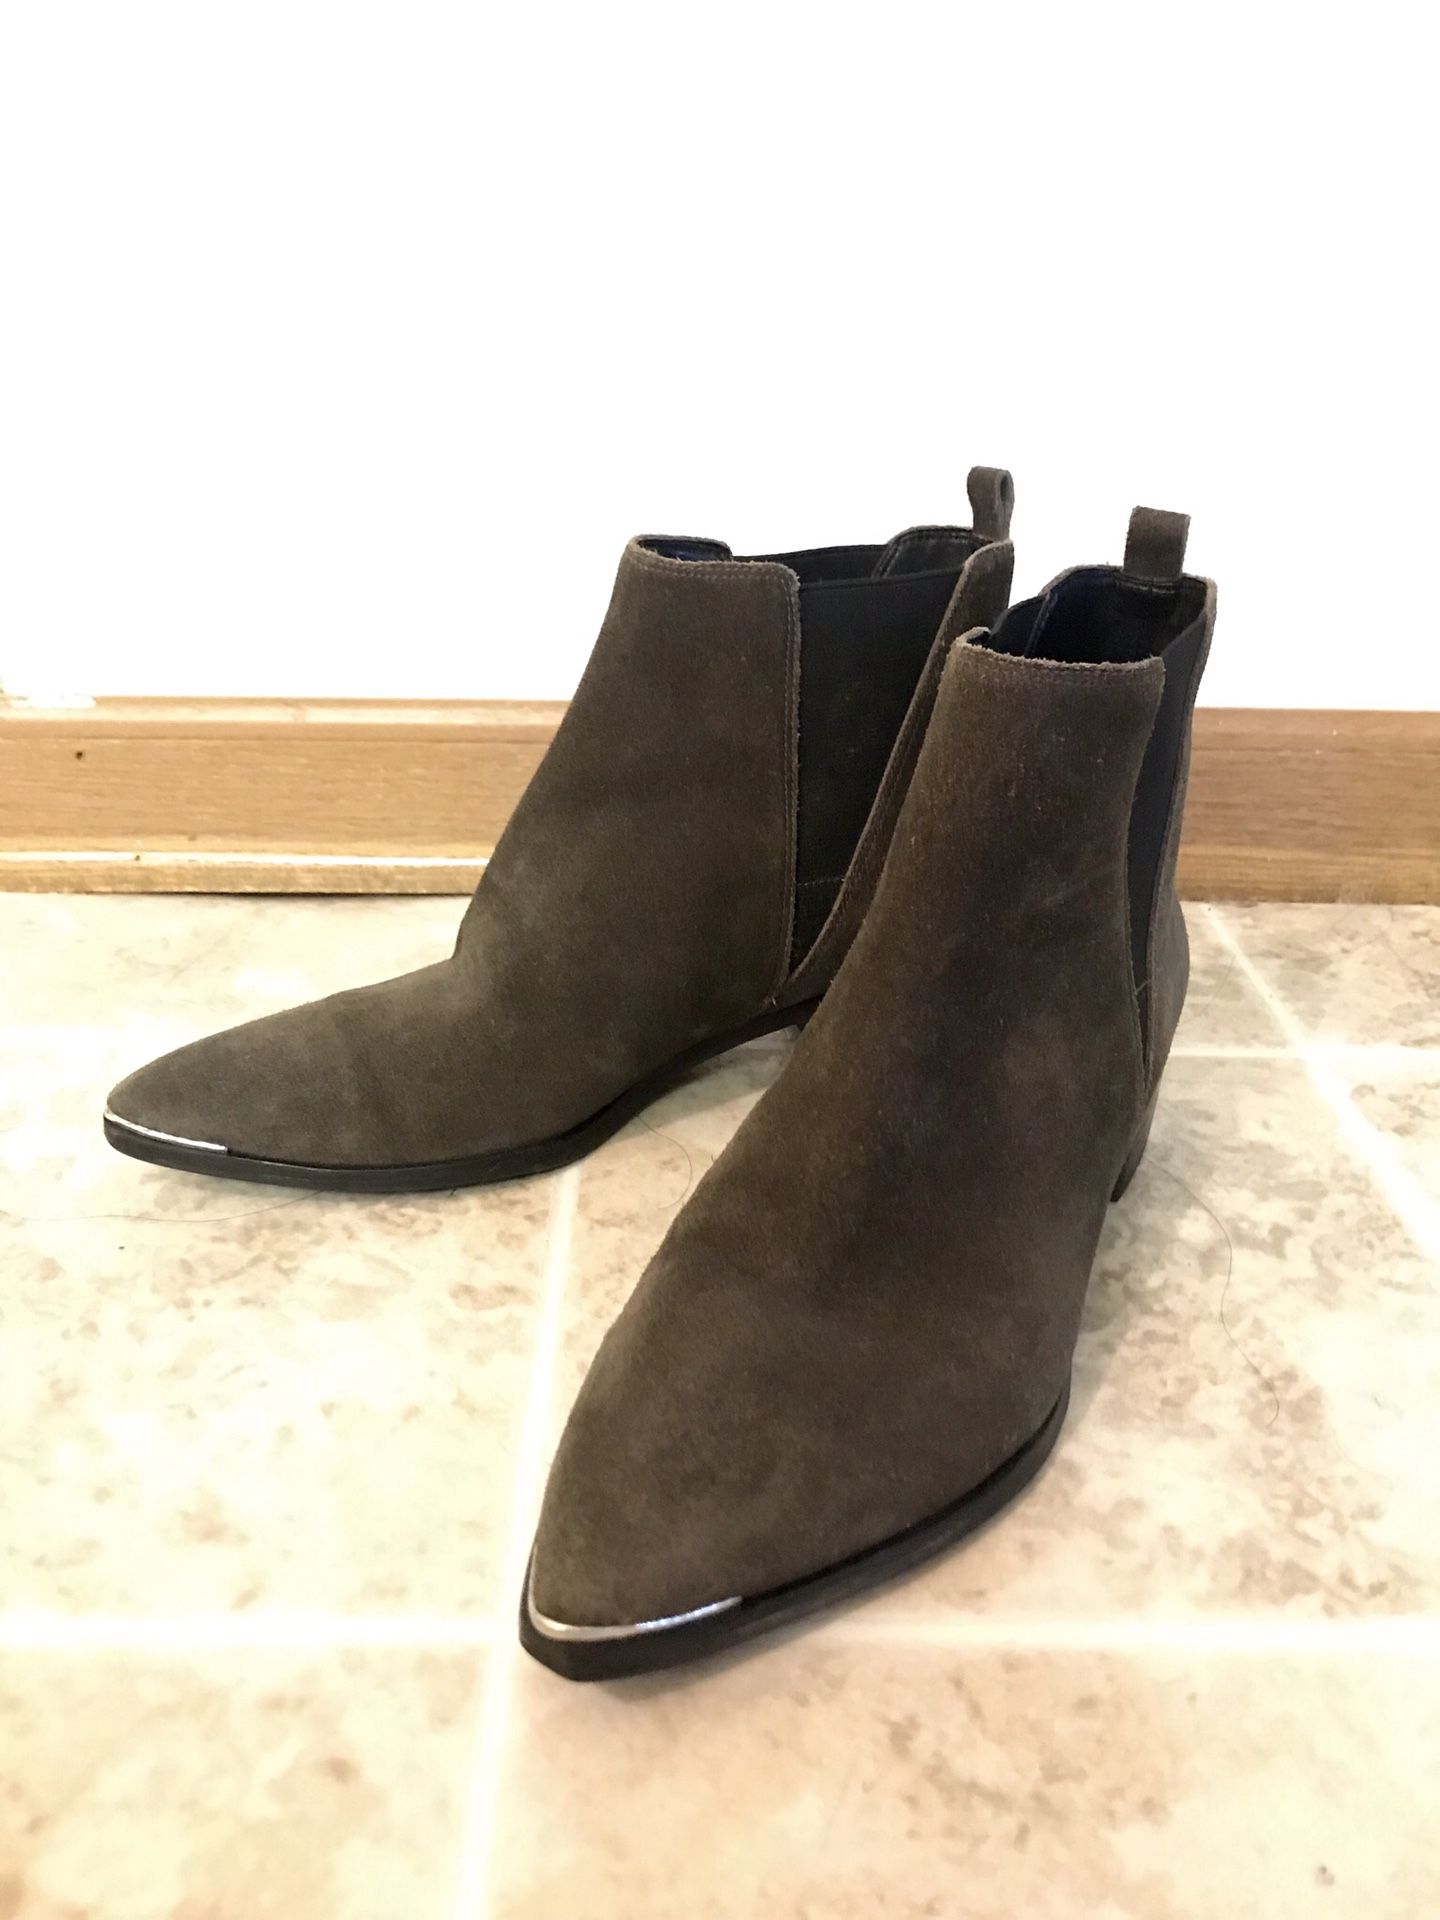 Marc Fisher “Yale” Olive/Brown Suede Booties - Women’s Size 8